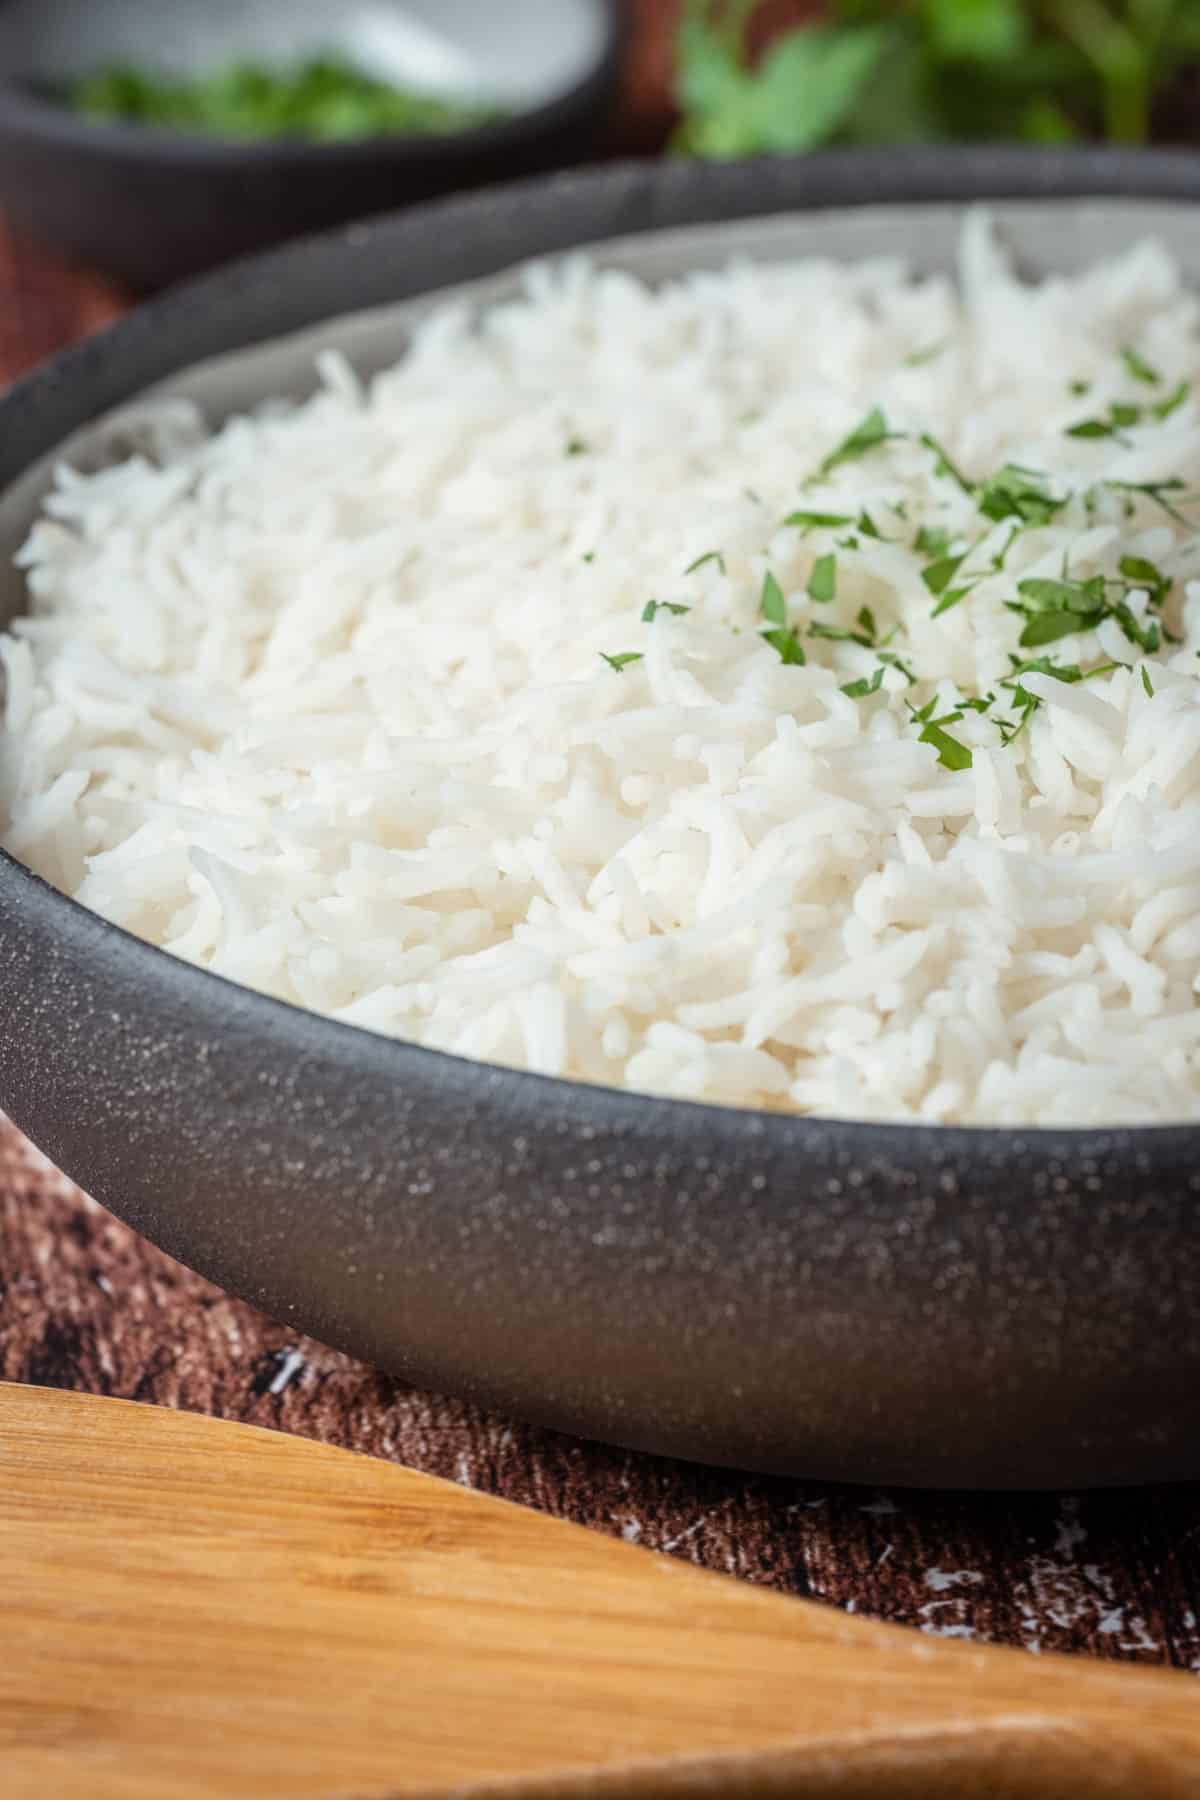 Basmati rice topped with fresh parsley.